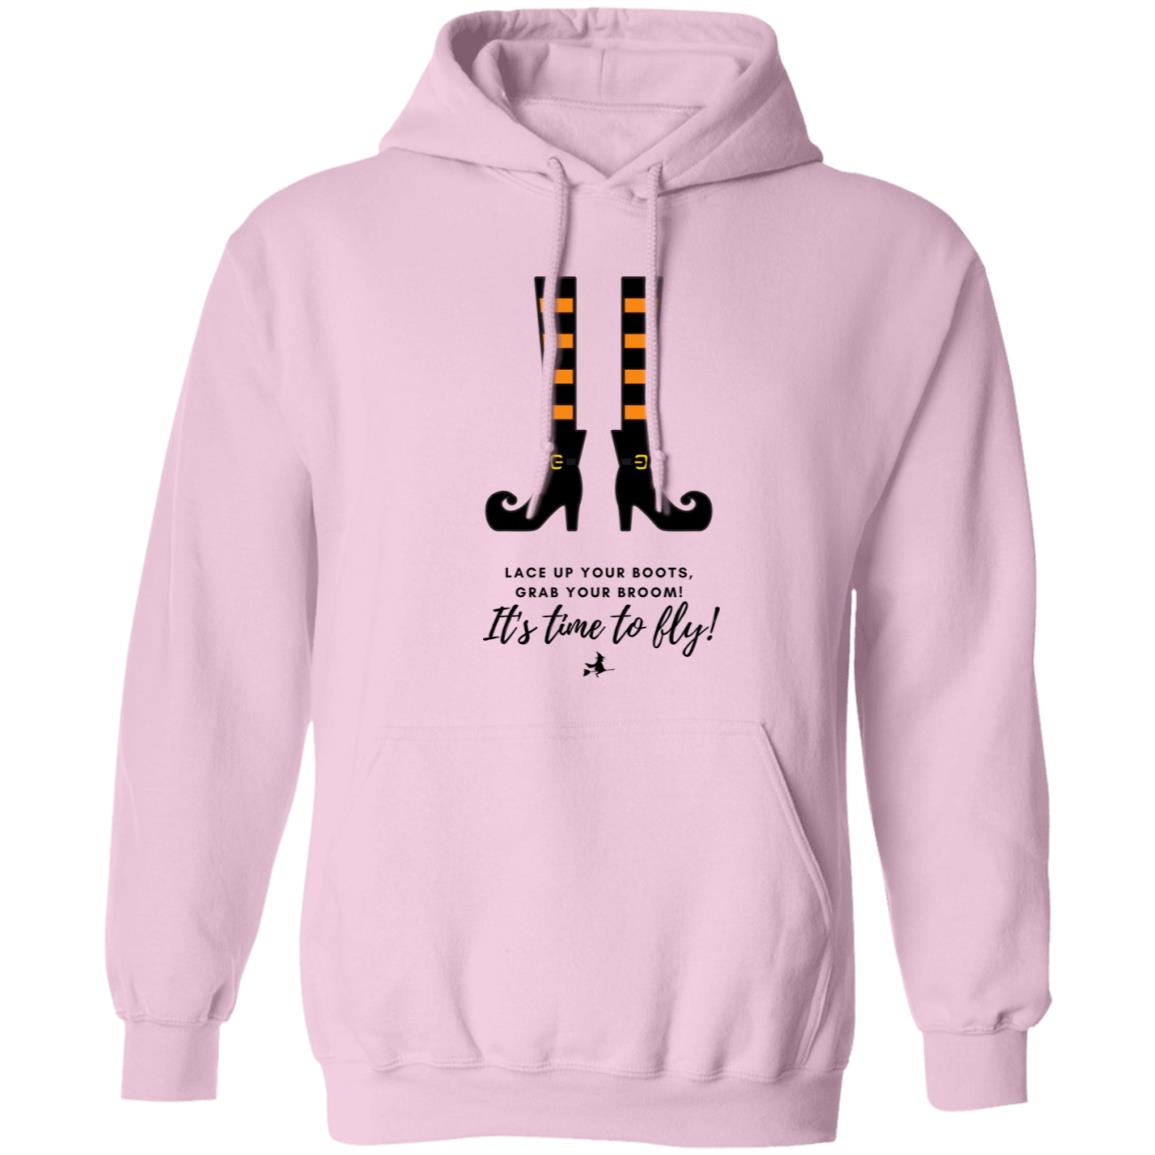 Lace up your boots T Shirt Lace Up Your Boots, Grab Your Broom - It's Time to Fly Hoodie